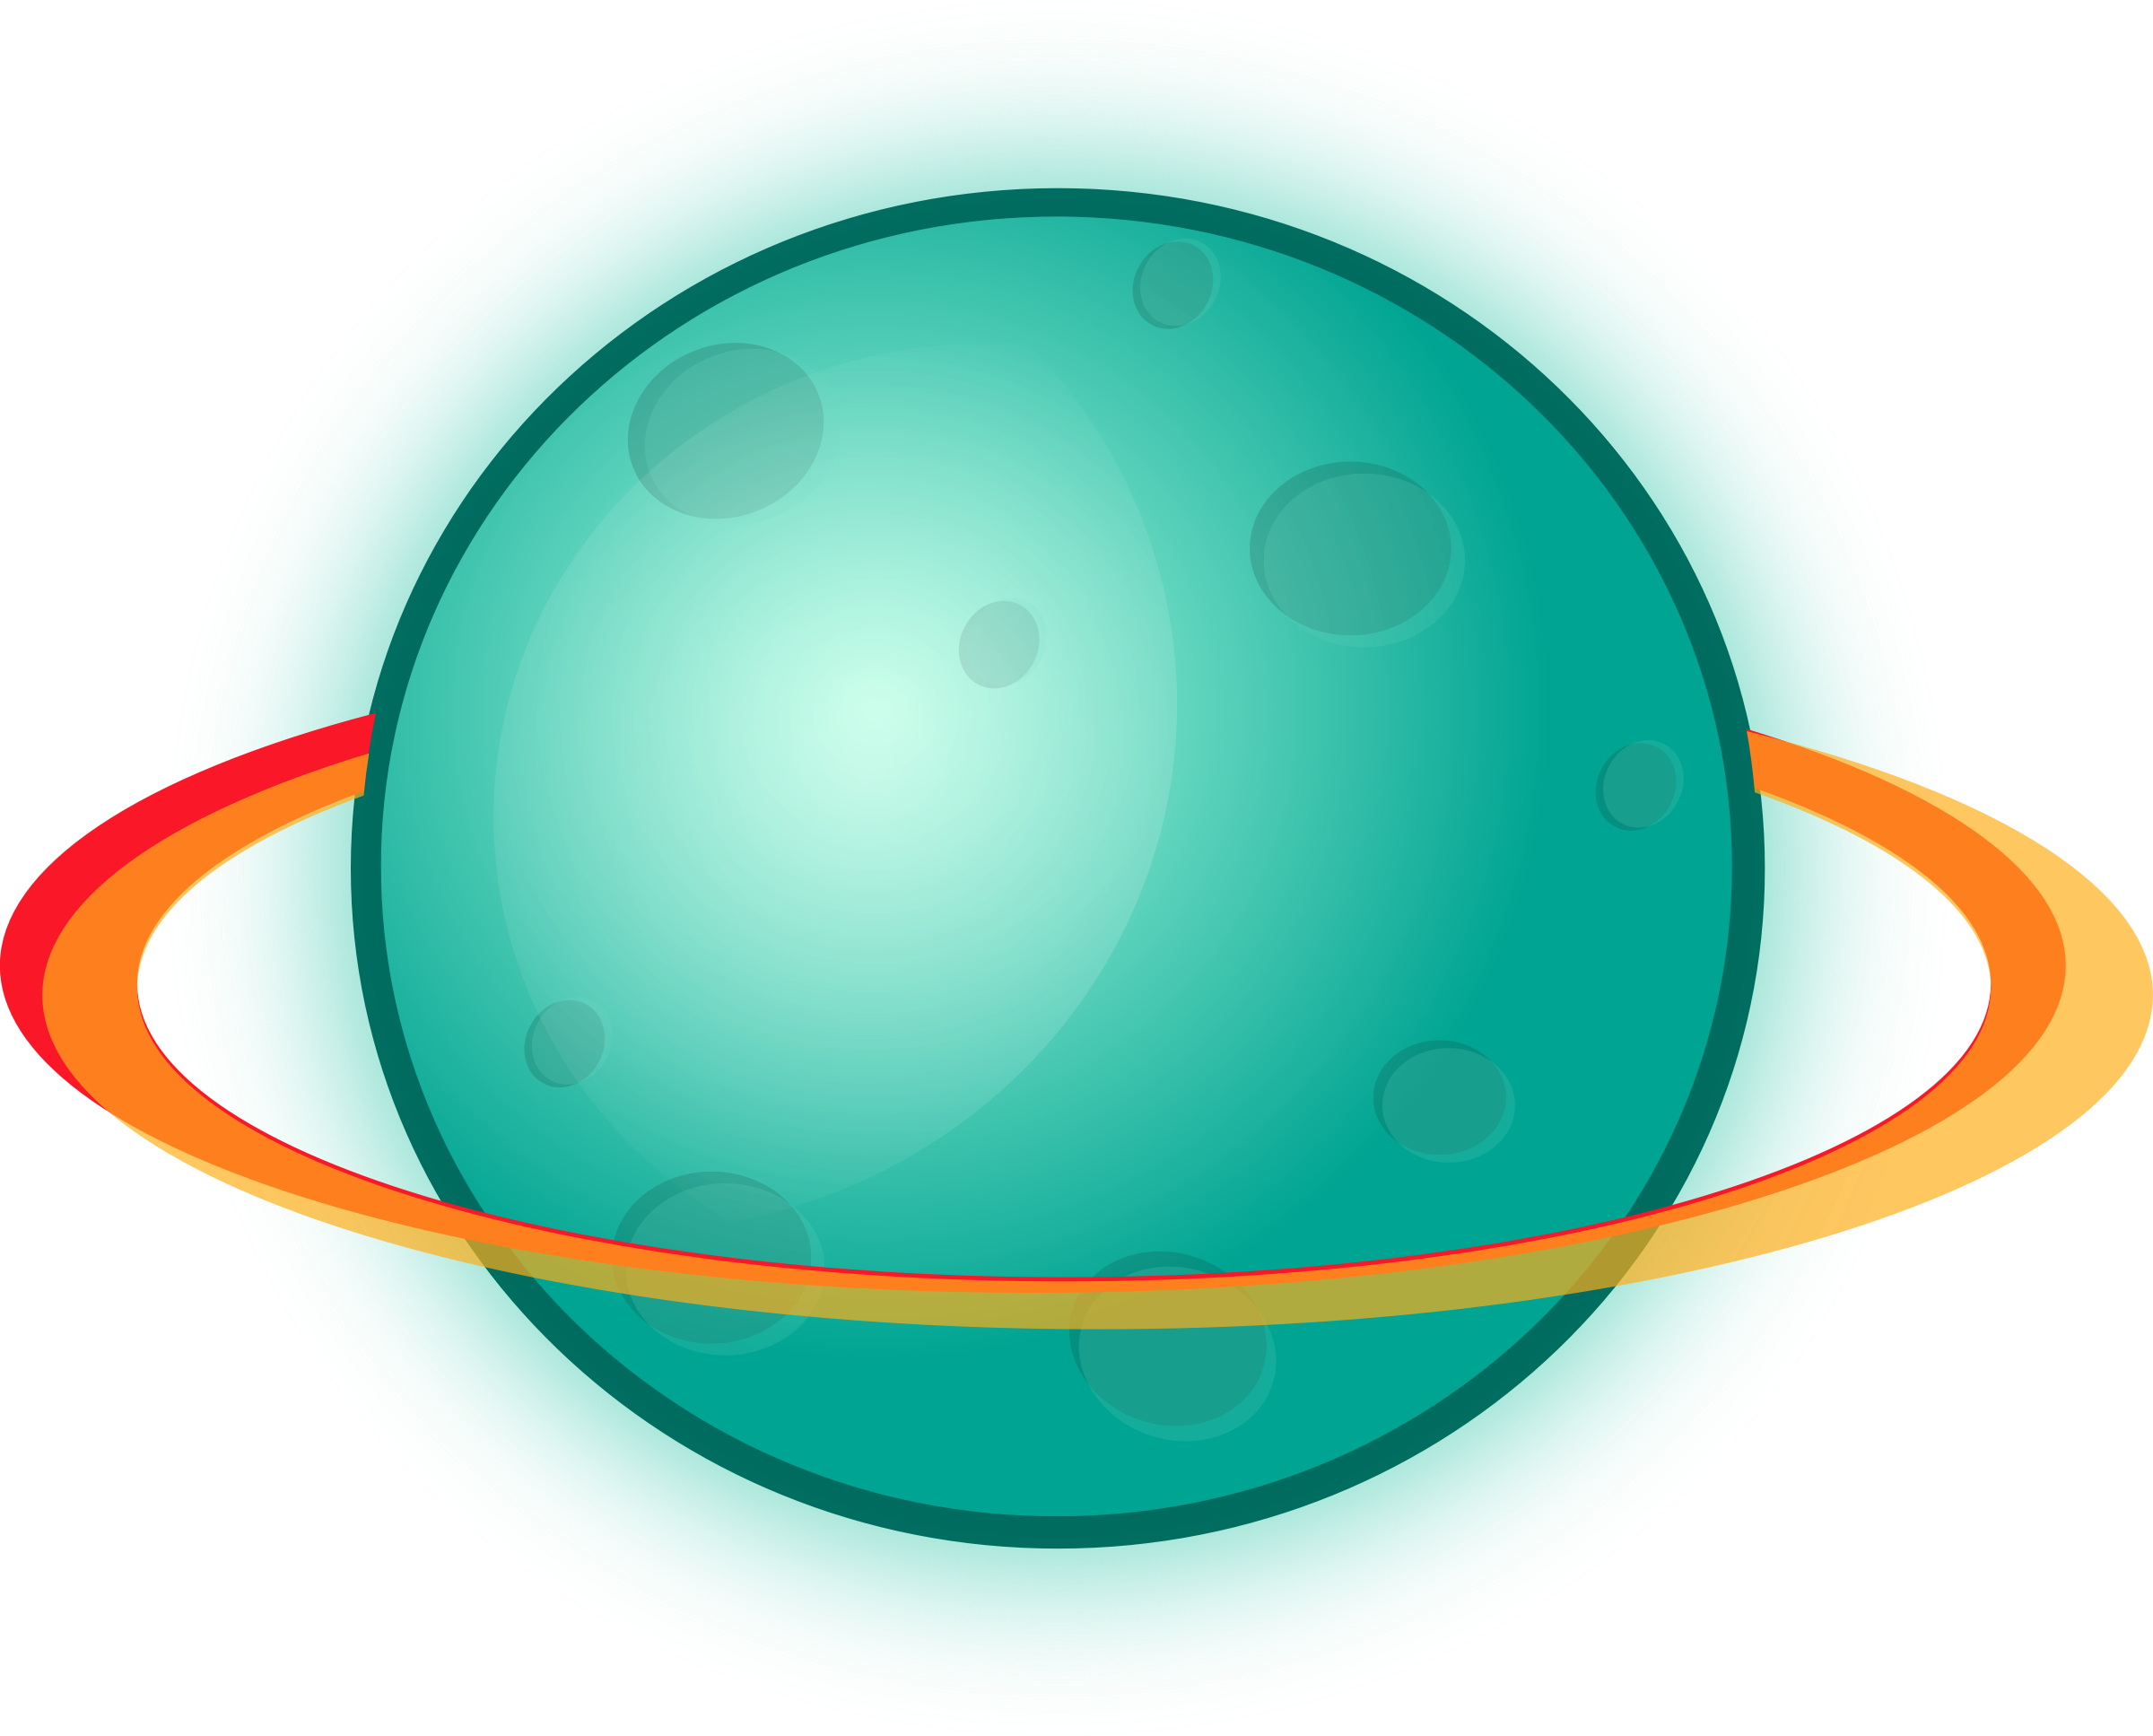 Stylized Planetwith Rings PNG image